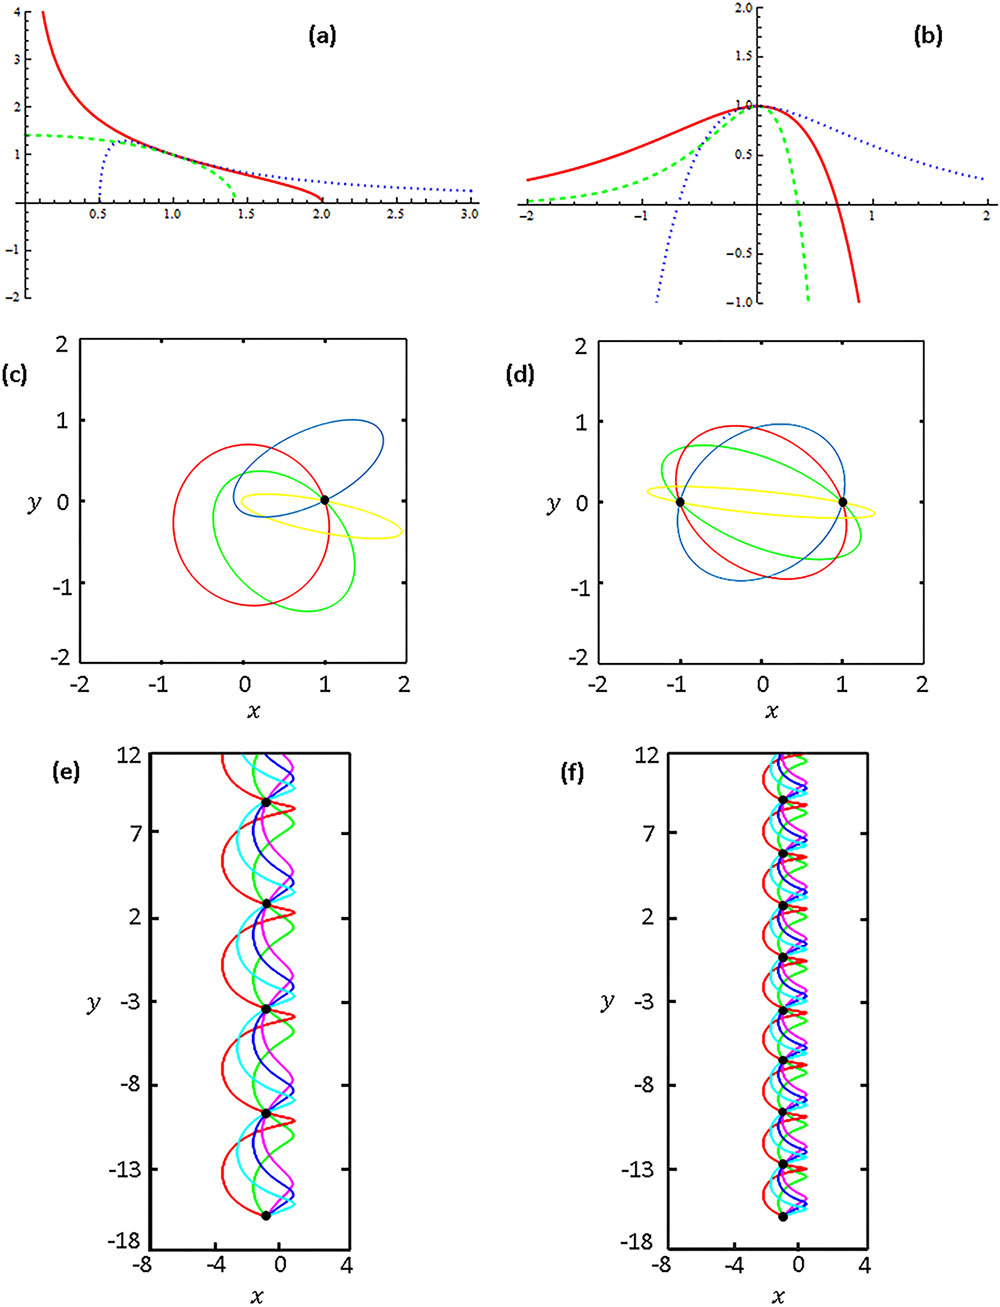 (a) The refractive index profiles for the Eaton lens (red), the Luneburg Lens (green) and the anti-Eaton lens (blue). (b) Refractive index profile for the Morse lens with a=−1 (red), a=−2 (green), and a=1 (blue). (c) Ray trajectories from a point of (1, 0) on the Eaton lens. (d) Ray trajectories from a point of (1, 0) on the Luneburg lens. (e) Ray trajectories from a point of (−1,−16) on the Morse lens with a=−1. (f) Ray trajectories from a point of (−1,−16) on the Morse lens with a=−2.